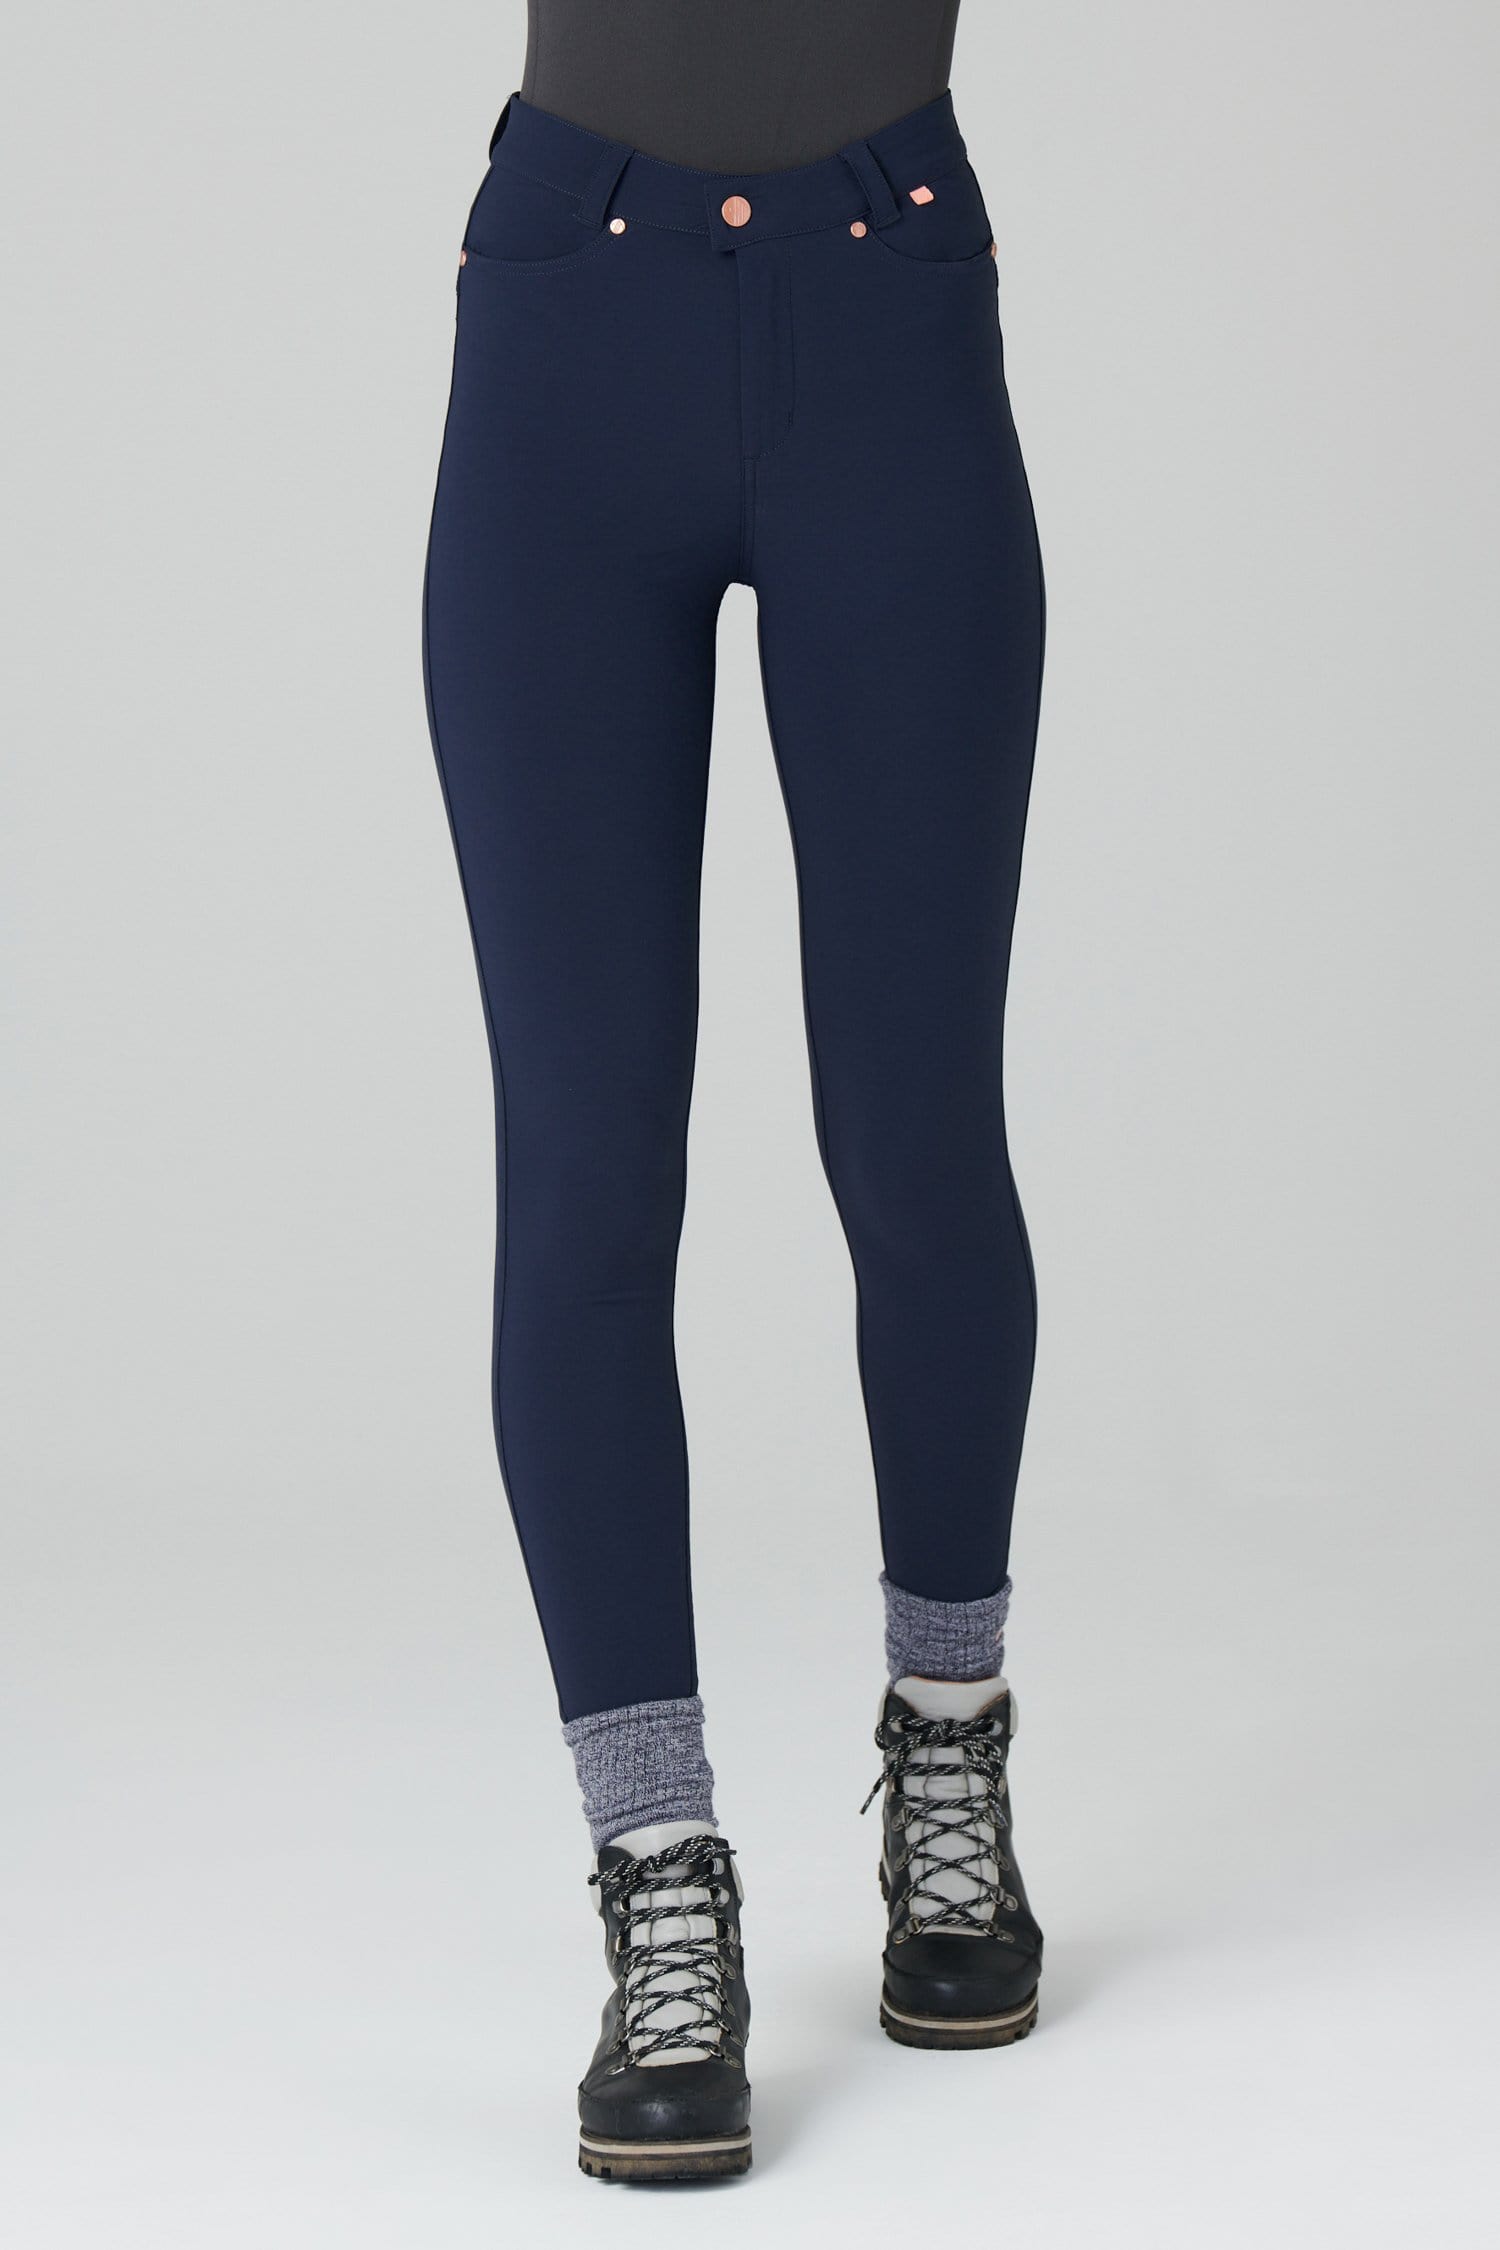 Max Stretch Skinny Outdoor Trousers - Deep Navy - 28r / Uk10 - Womens - Acai Outdoorwear